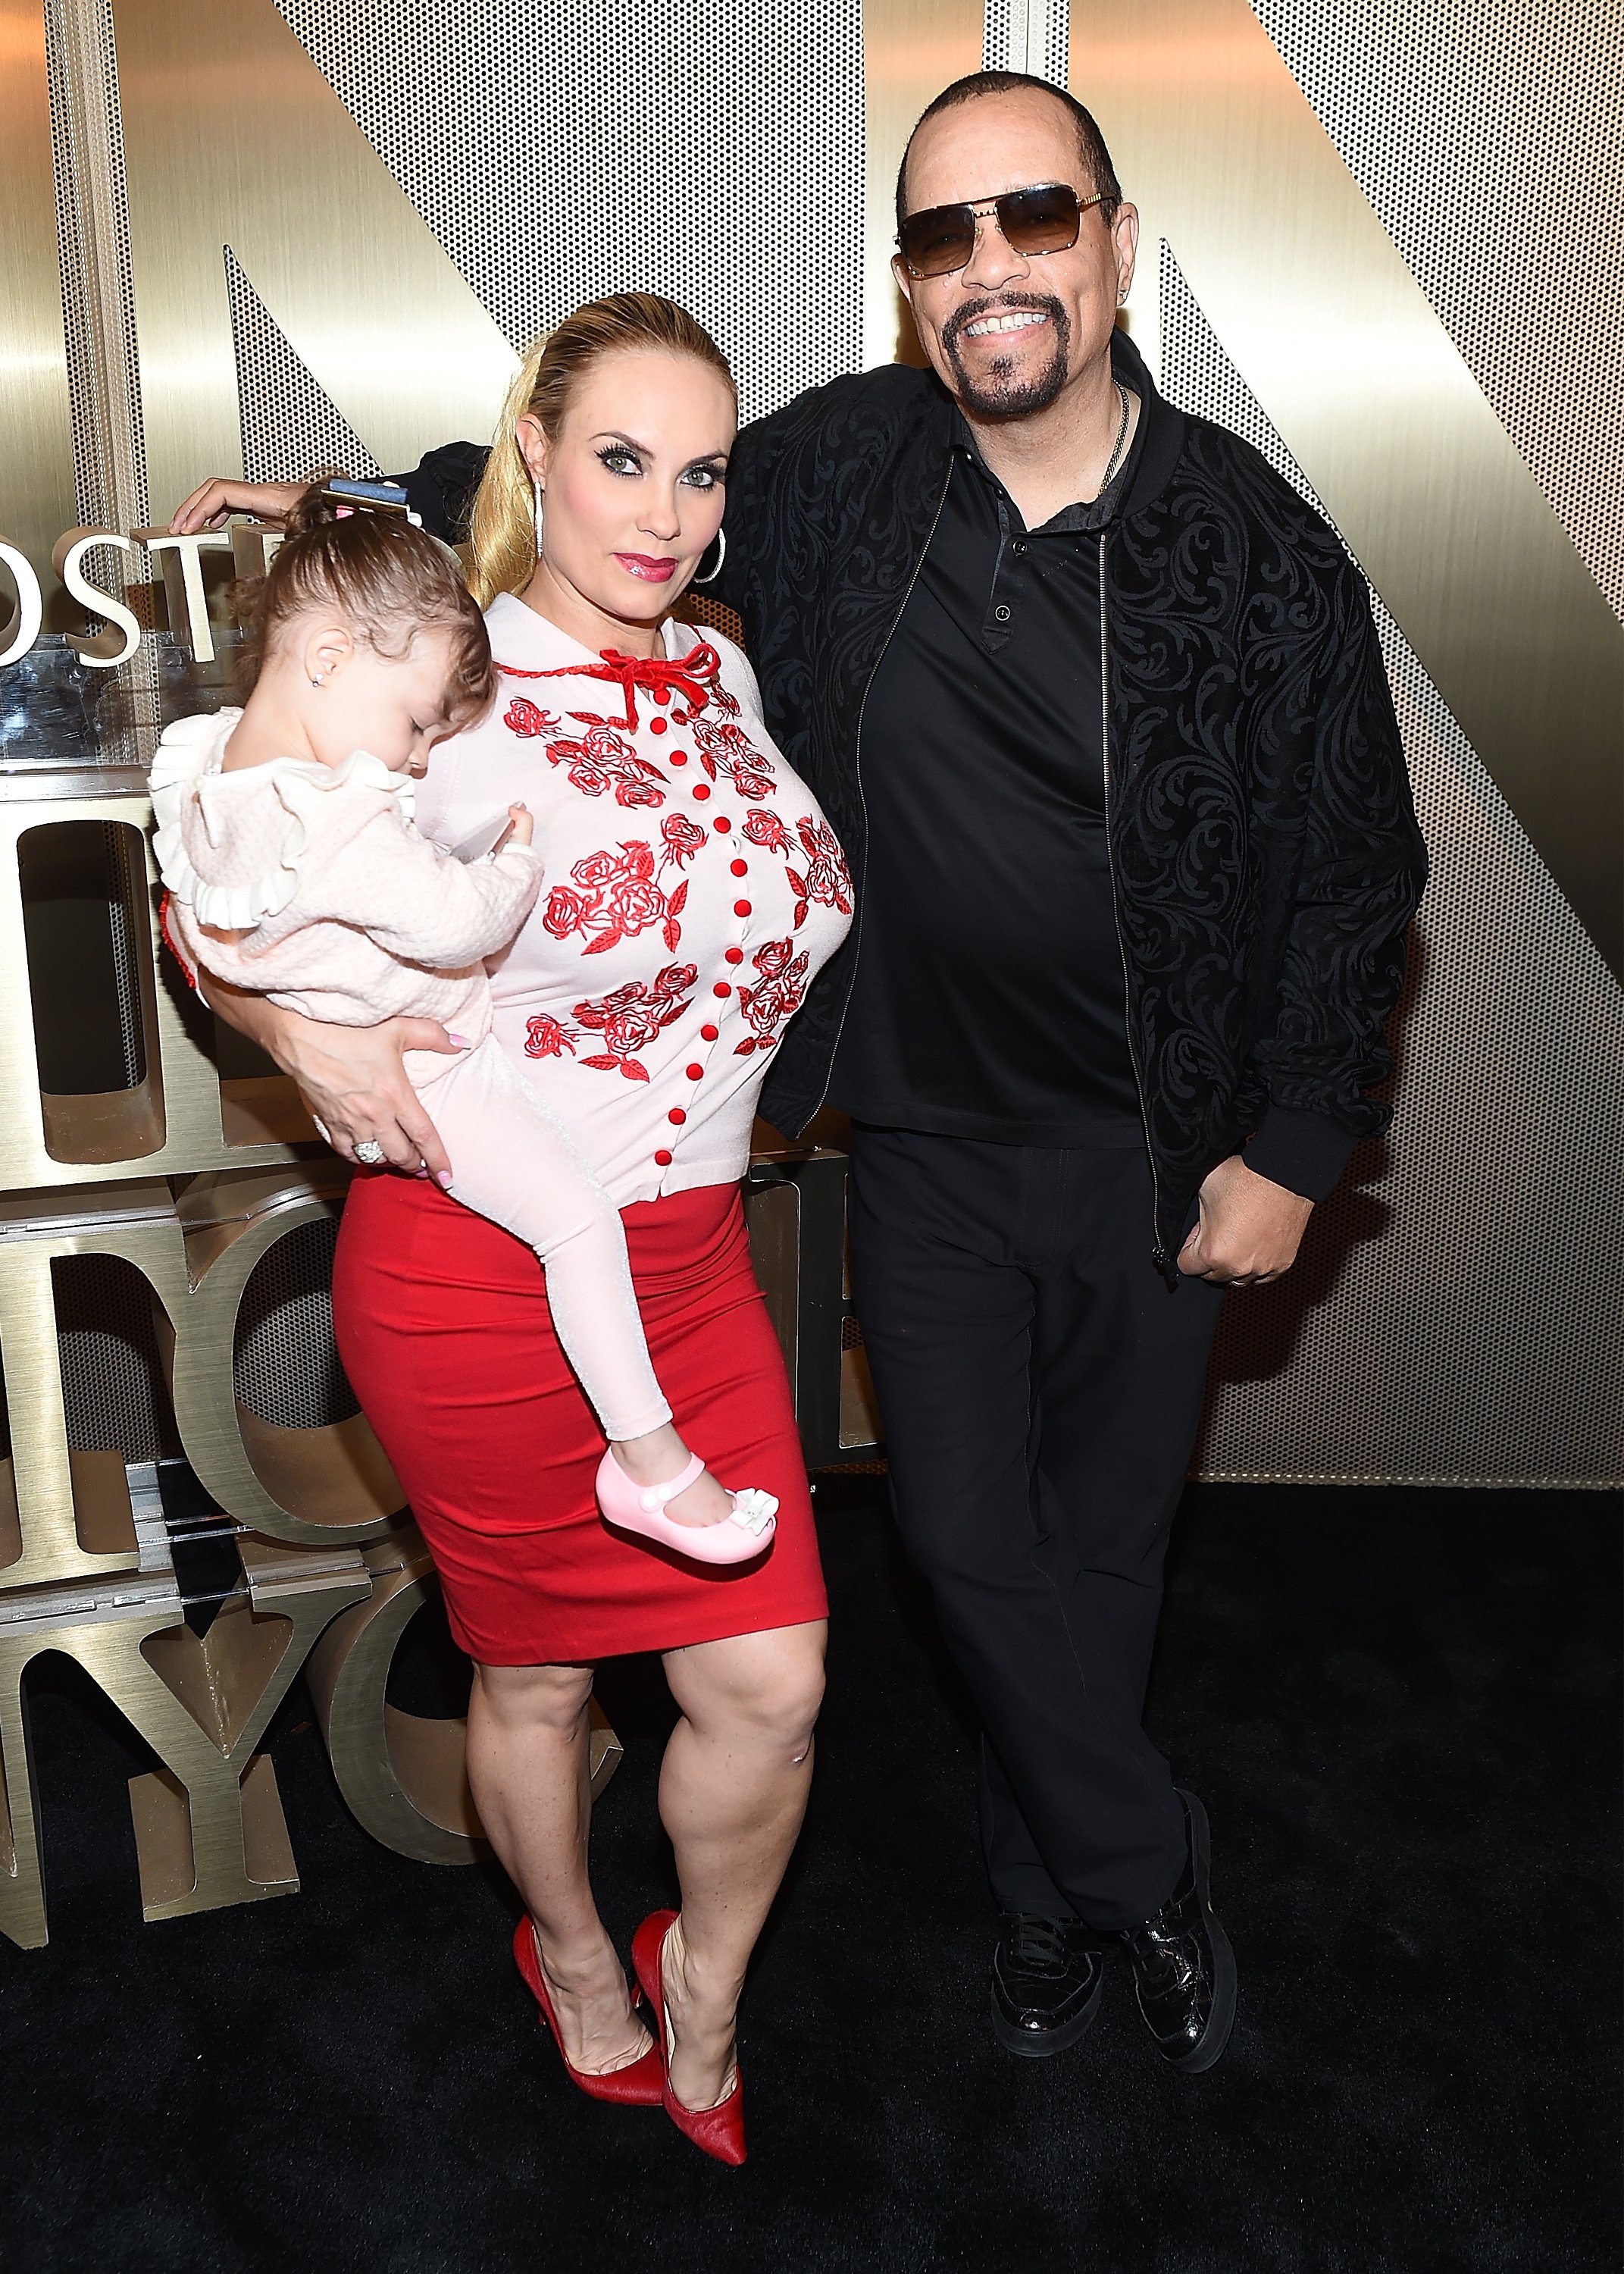 Chanel Nicole Marrow Is Best Known as Ice-T and Coco Austin's Daughter